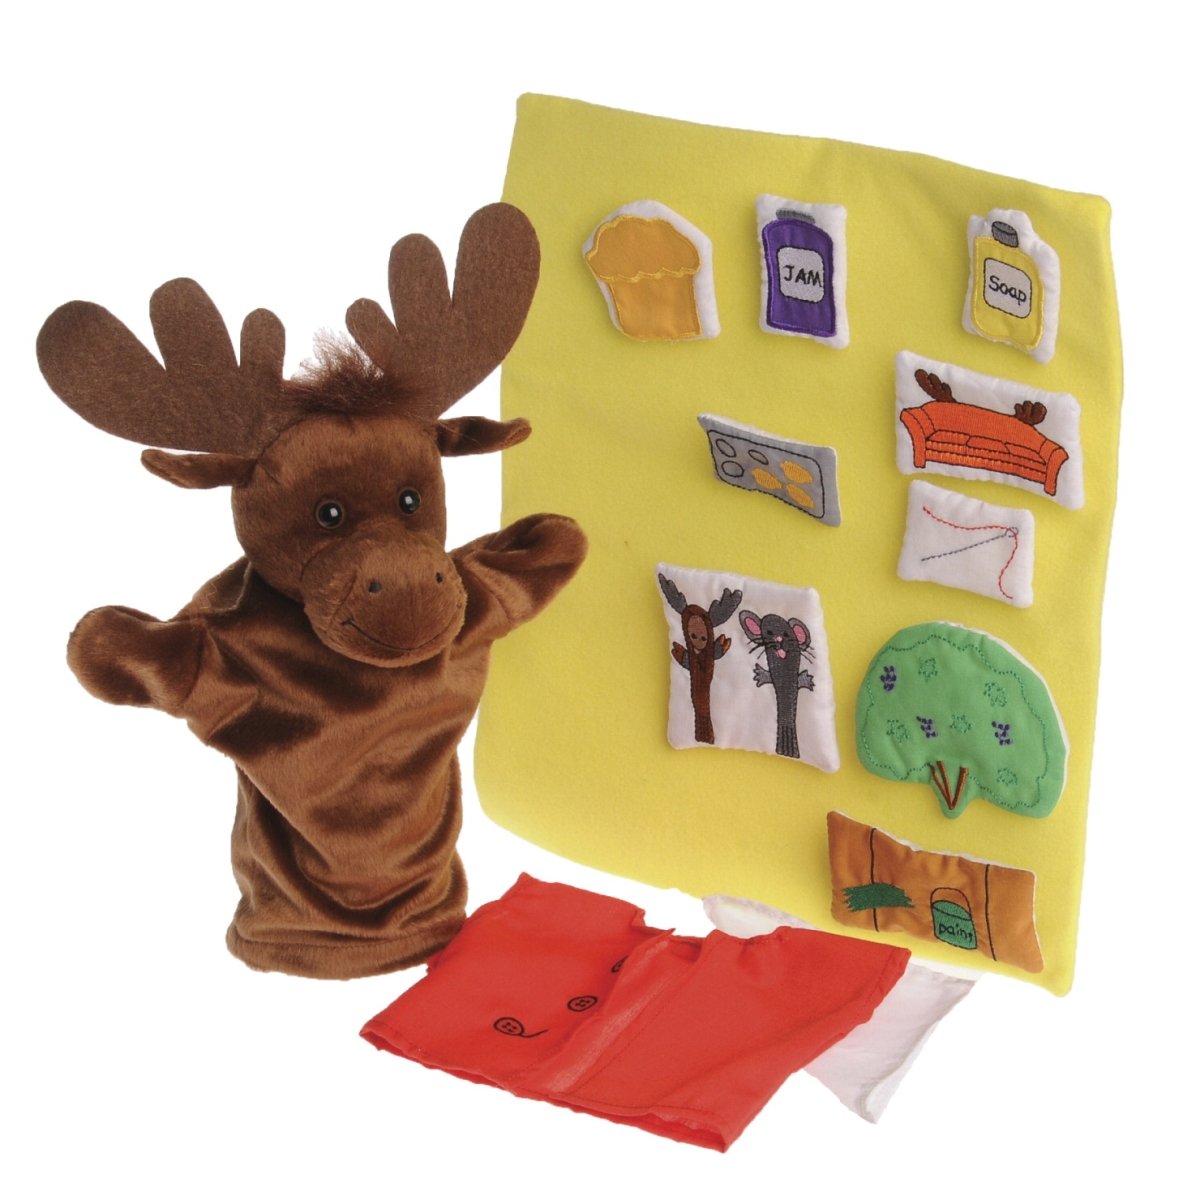 Marvel Education 1531963 Marvel Education Puppet & Props For If You Give A Moose A Muffin, Set Of 13